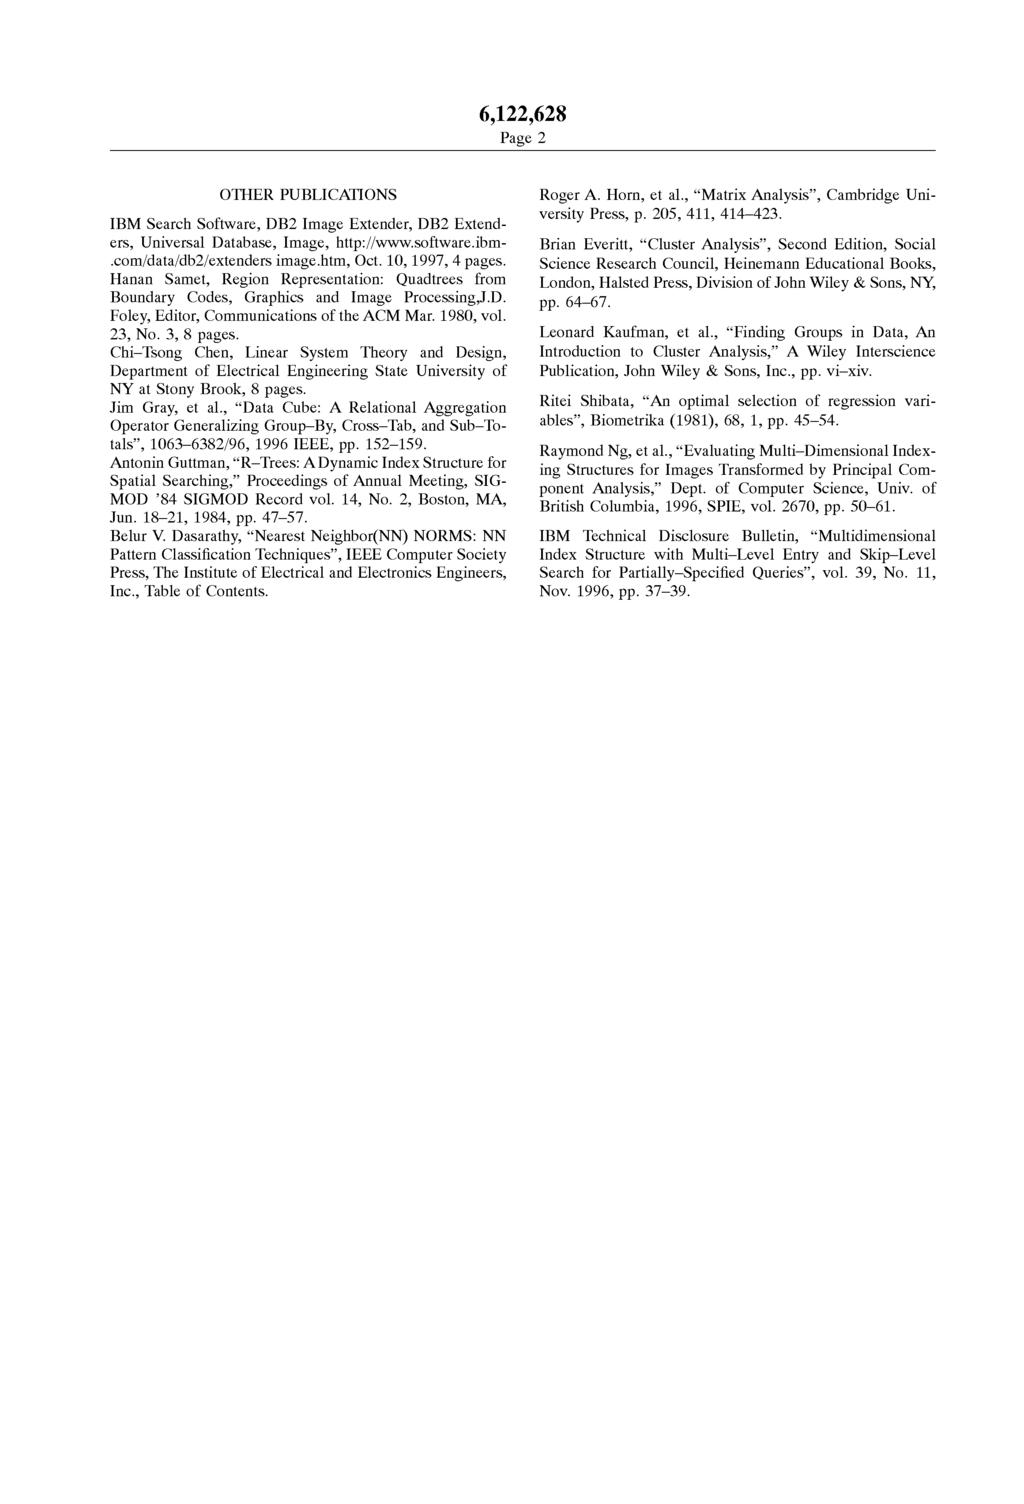 Page 2 OTHER PUBLICATIONS IBM Search Software, DB2 Image Extender, DB2 Extend ers, Universal Database, Image, http://www.software.ibm.com/data/db2/extenders image.htm, Oct. 10, 1997, 4 pages.